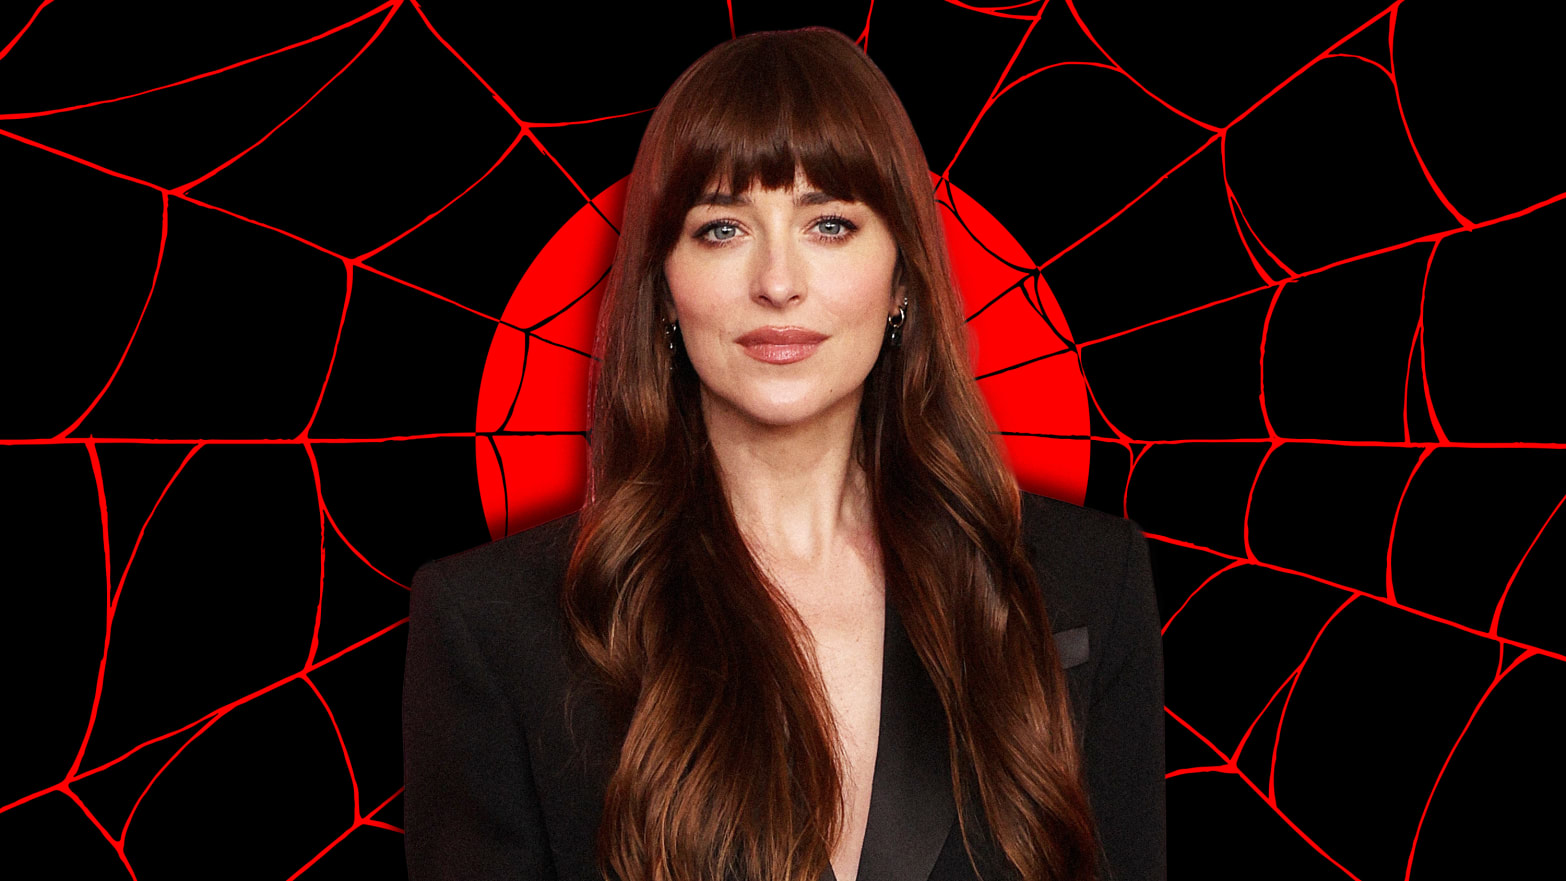 A photo illustration of Dakota Johnson and a background of spider webs.